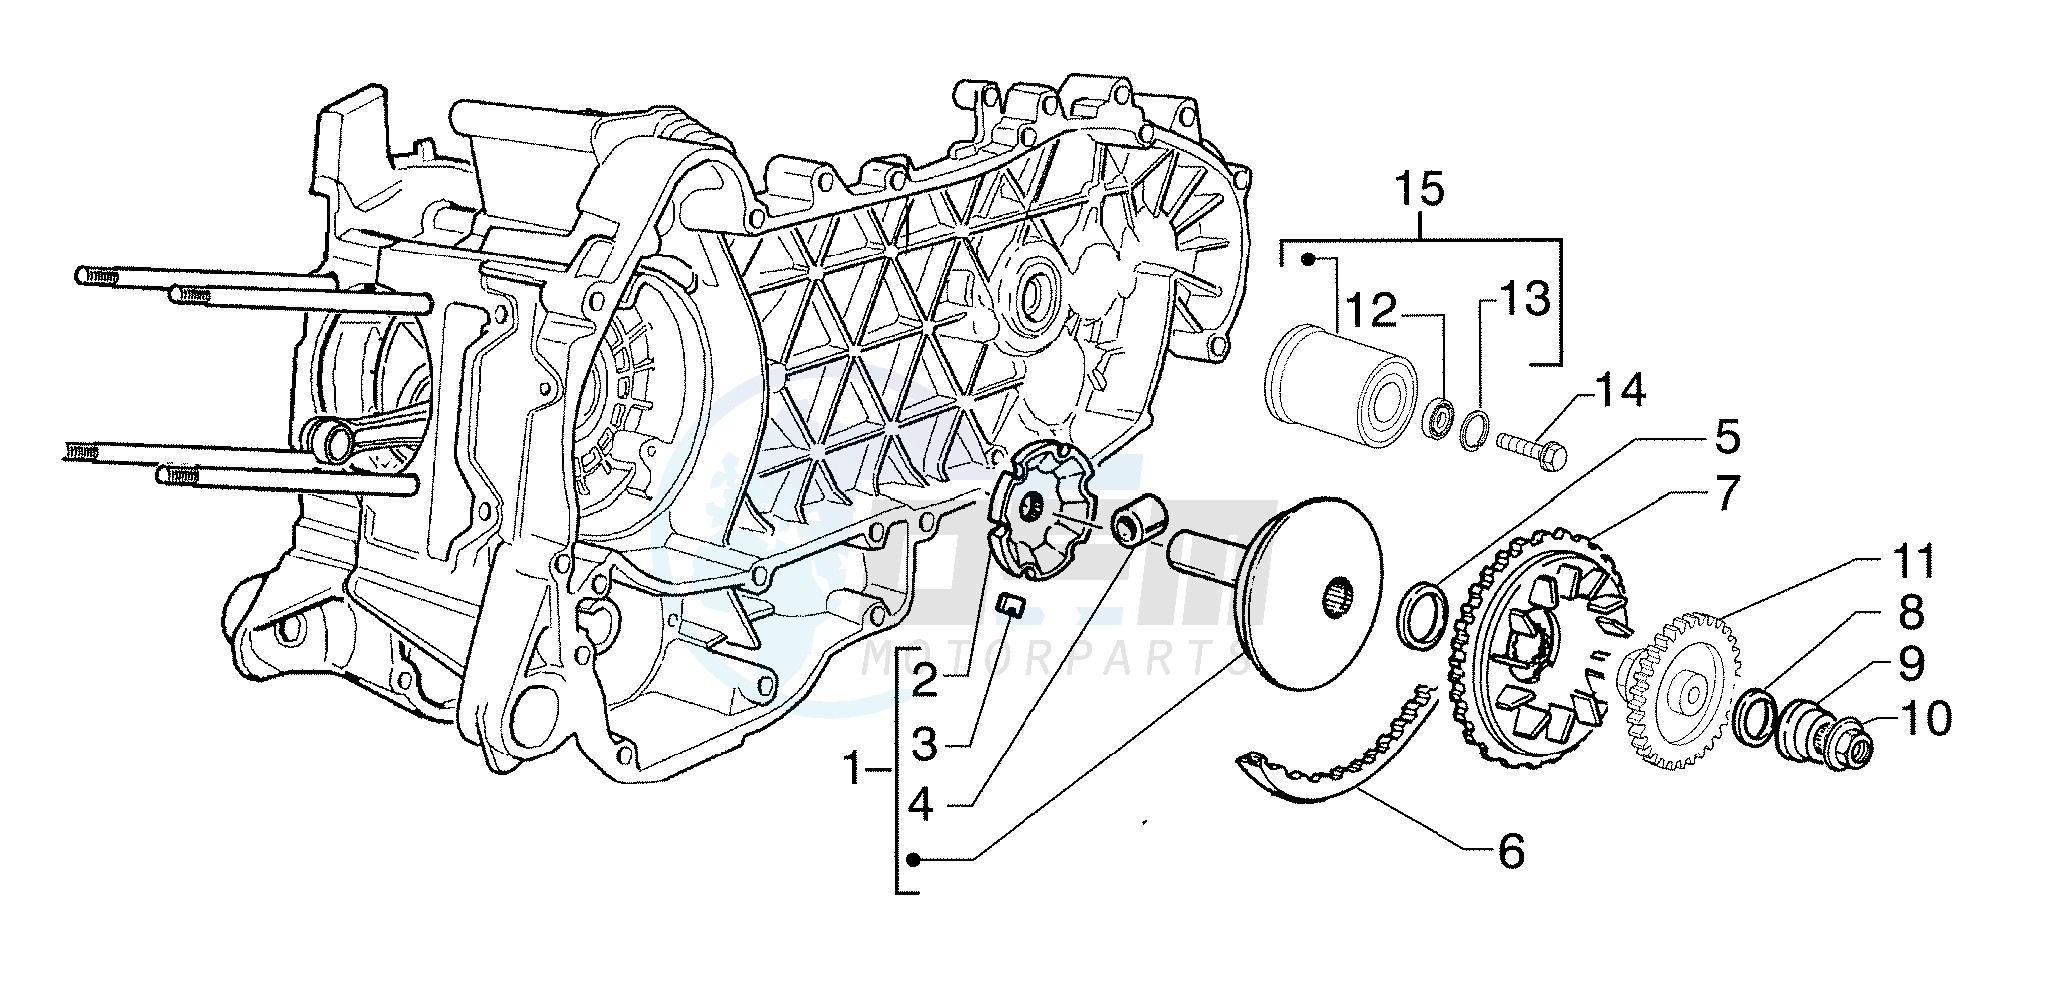 Half-pulley assy. driving image